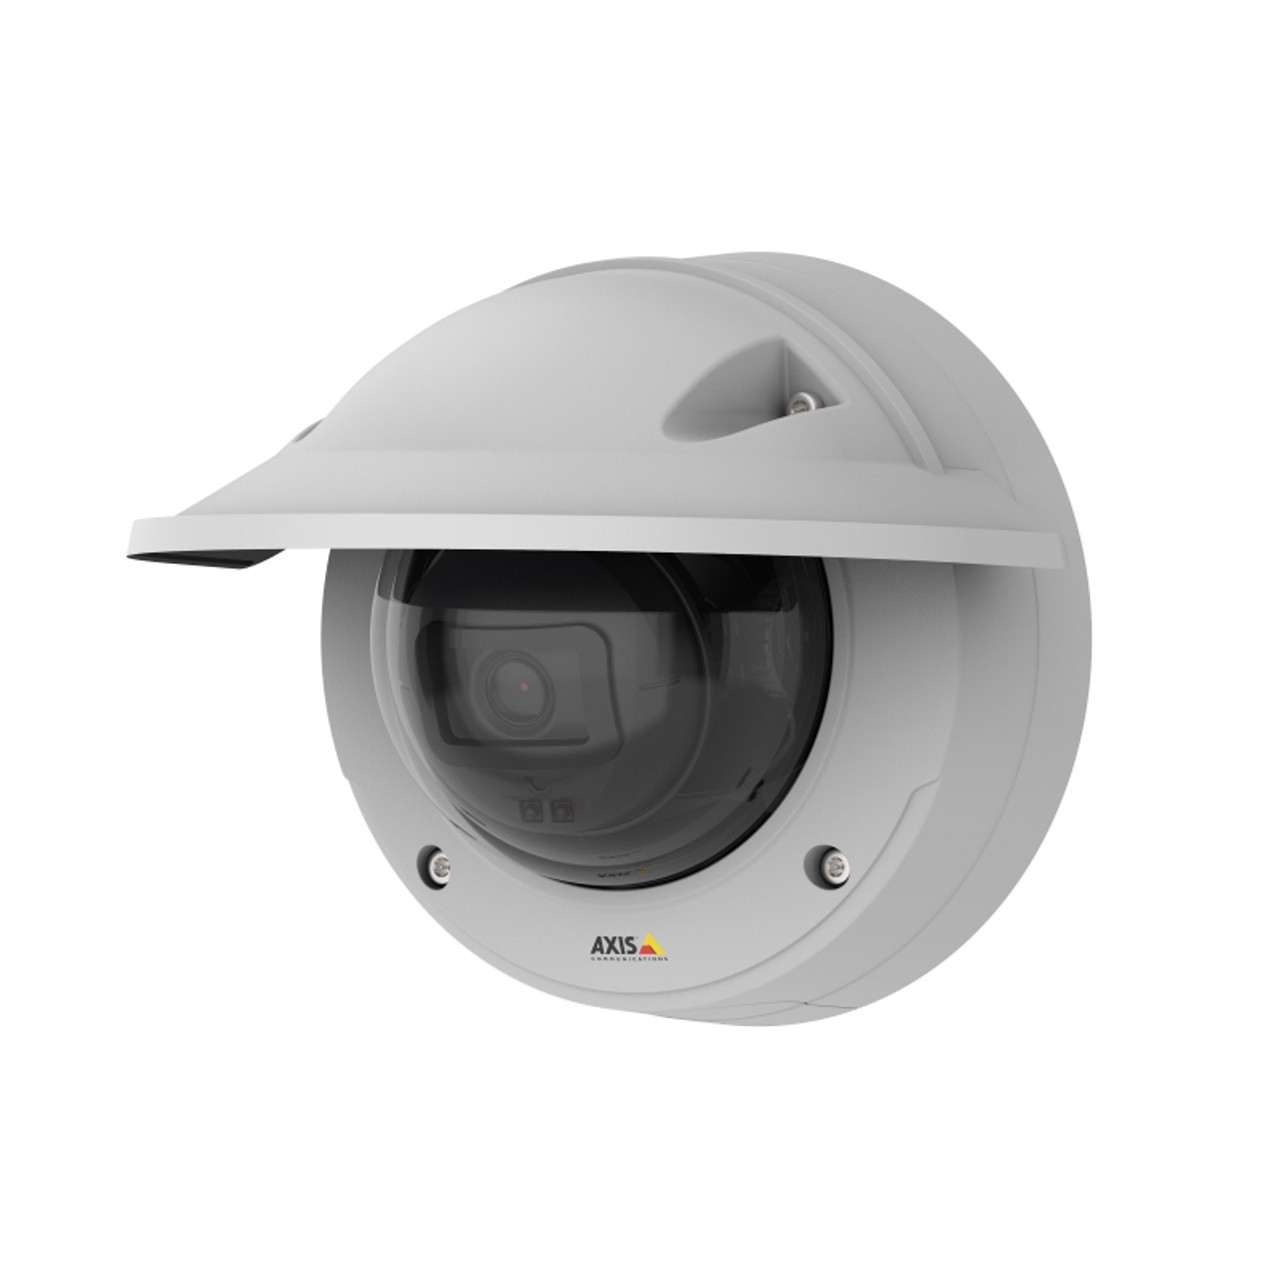 AXIS M3206-LVE Outdoor IP Security Camera - 01518-001